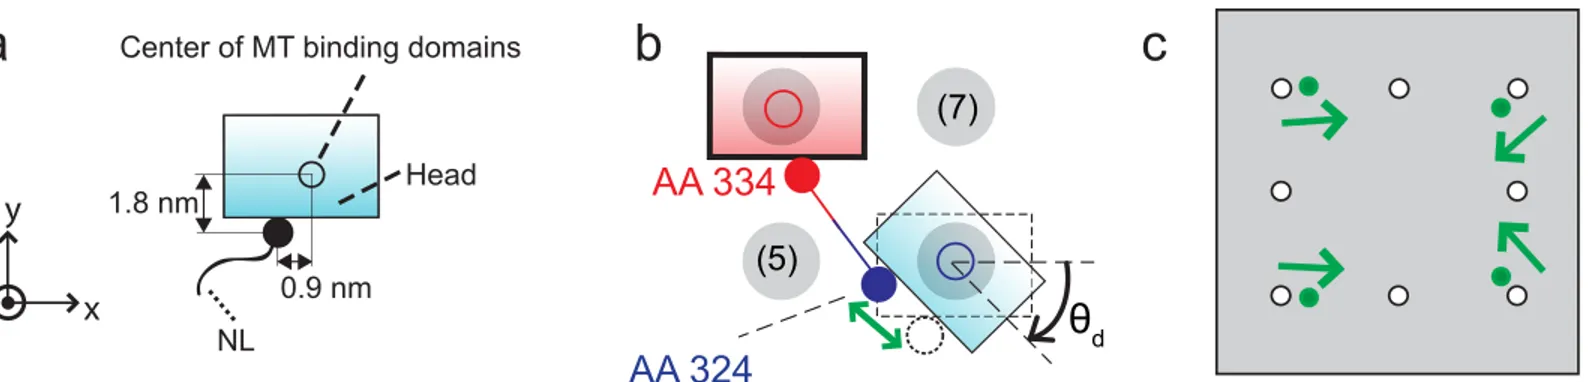 Fig 5. Free head when binding to diagonal binding sites. (a) depicts the positions of AA 324 with a filled circle